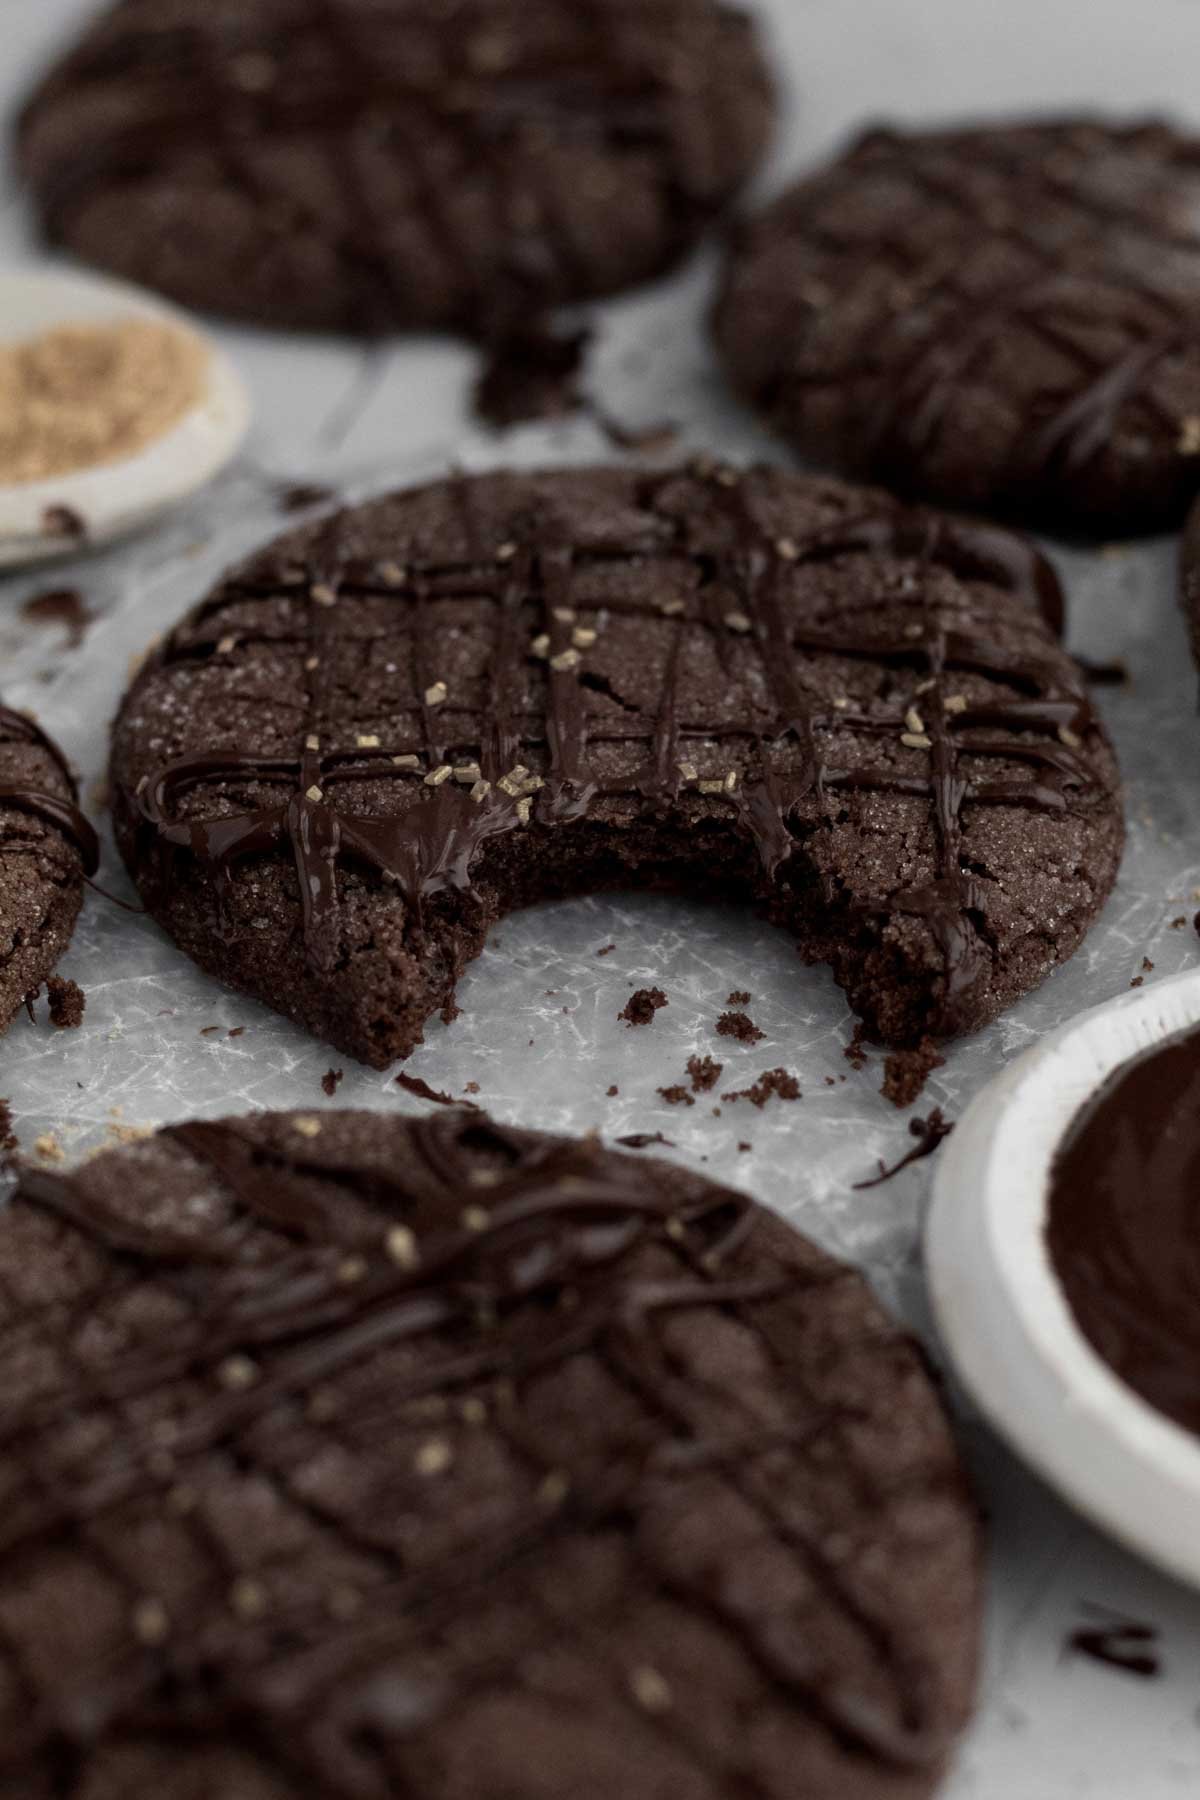 A bite taken from the soft delicious Chocolate Ginger Cookie reveals spiced and rich baked perfection.